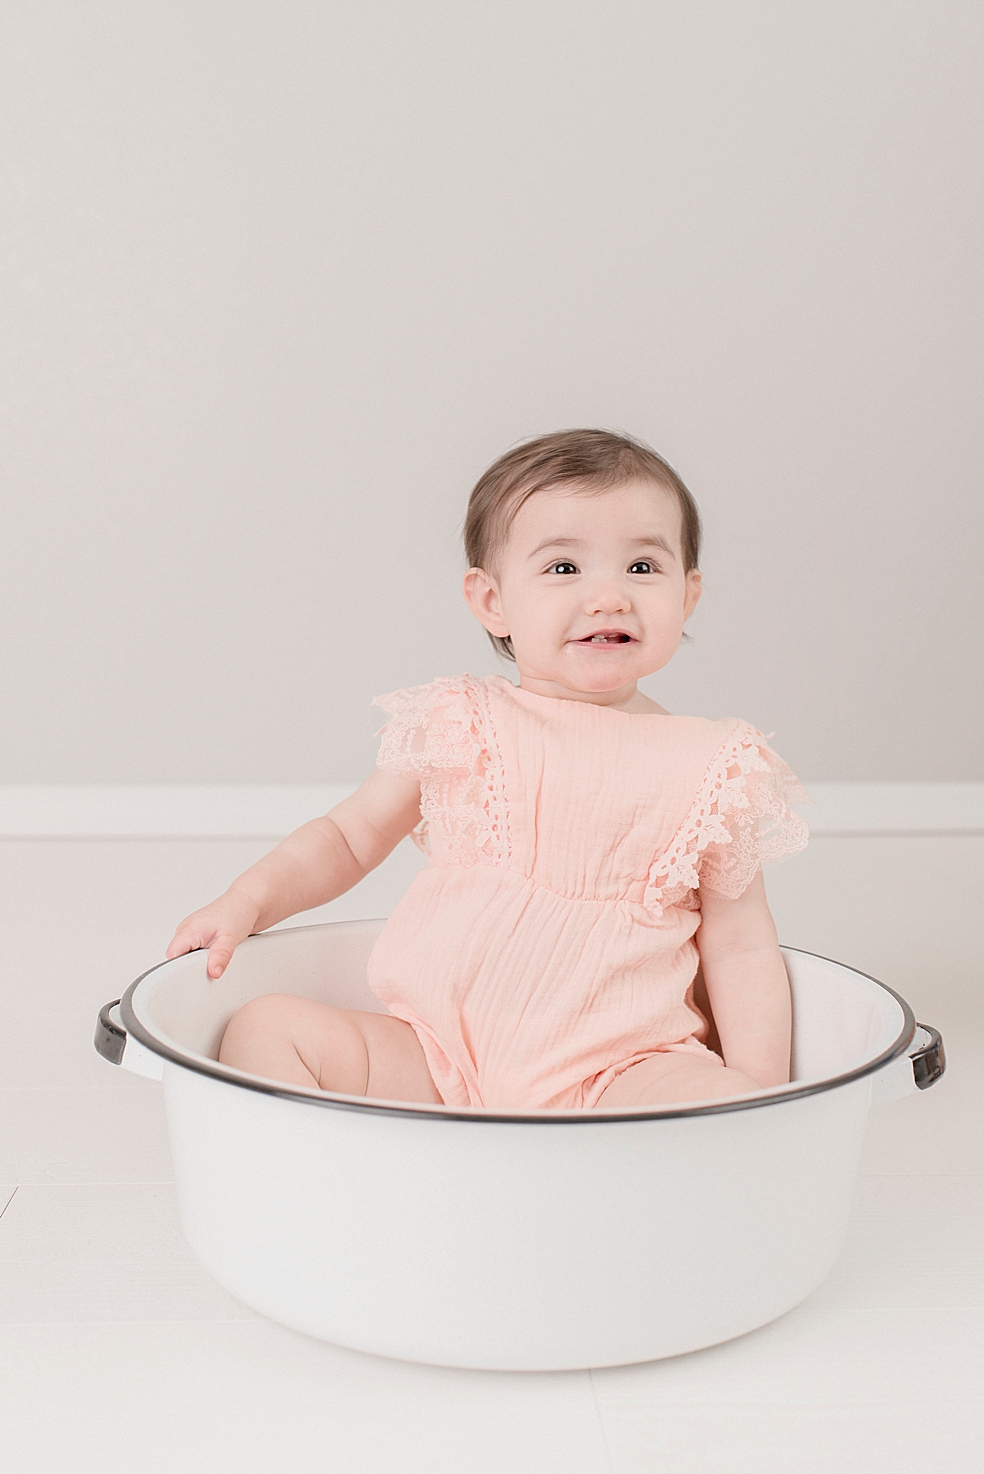 Baby girl in pink dress sitting in a bowl | Photo by Jessica Lee Photography